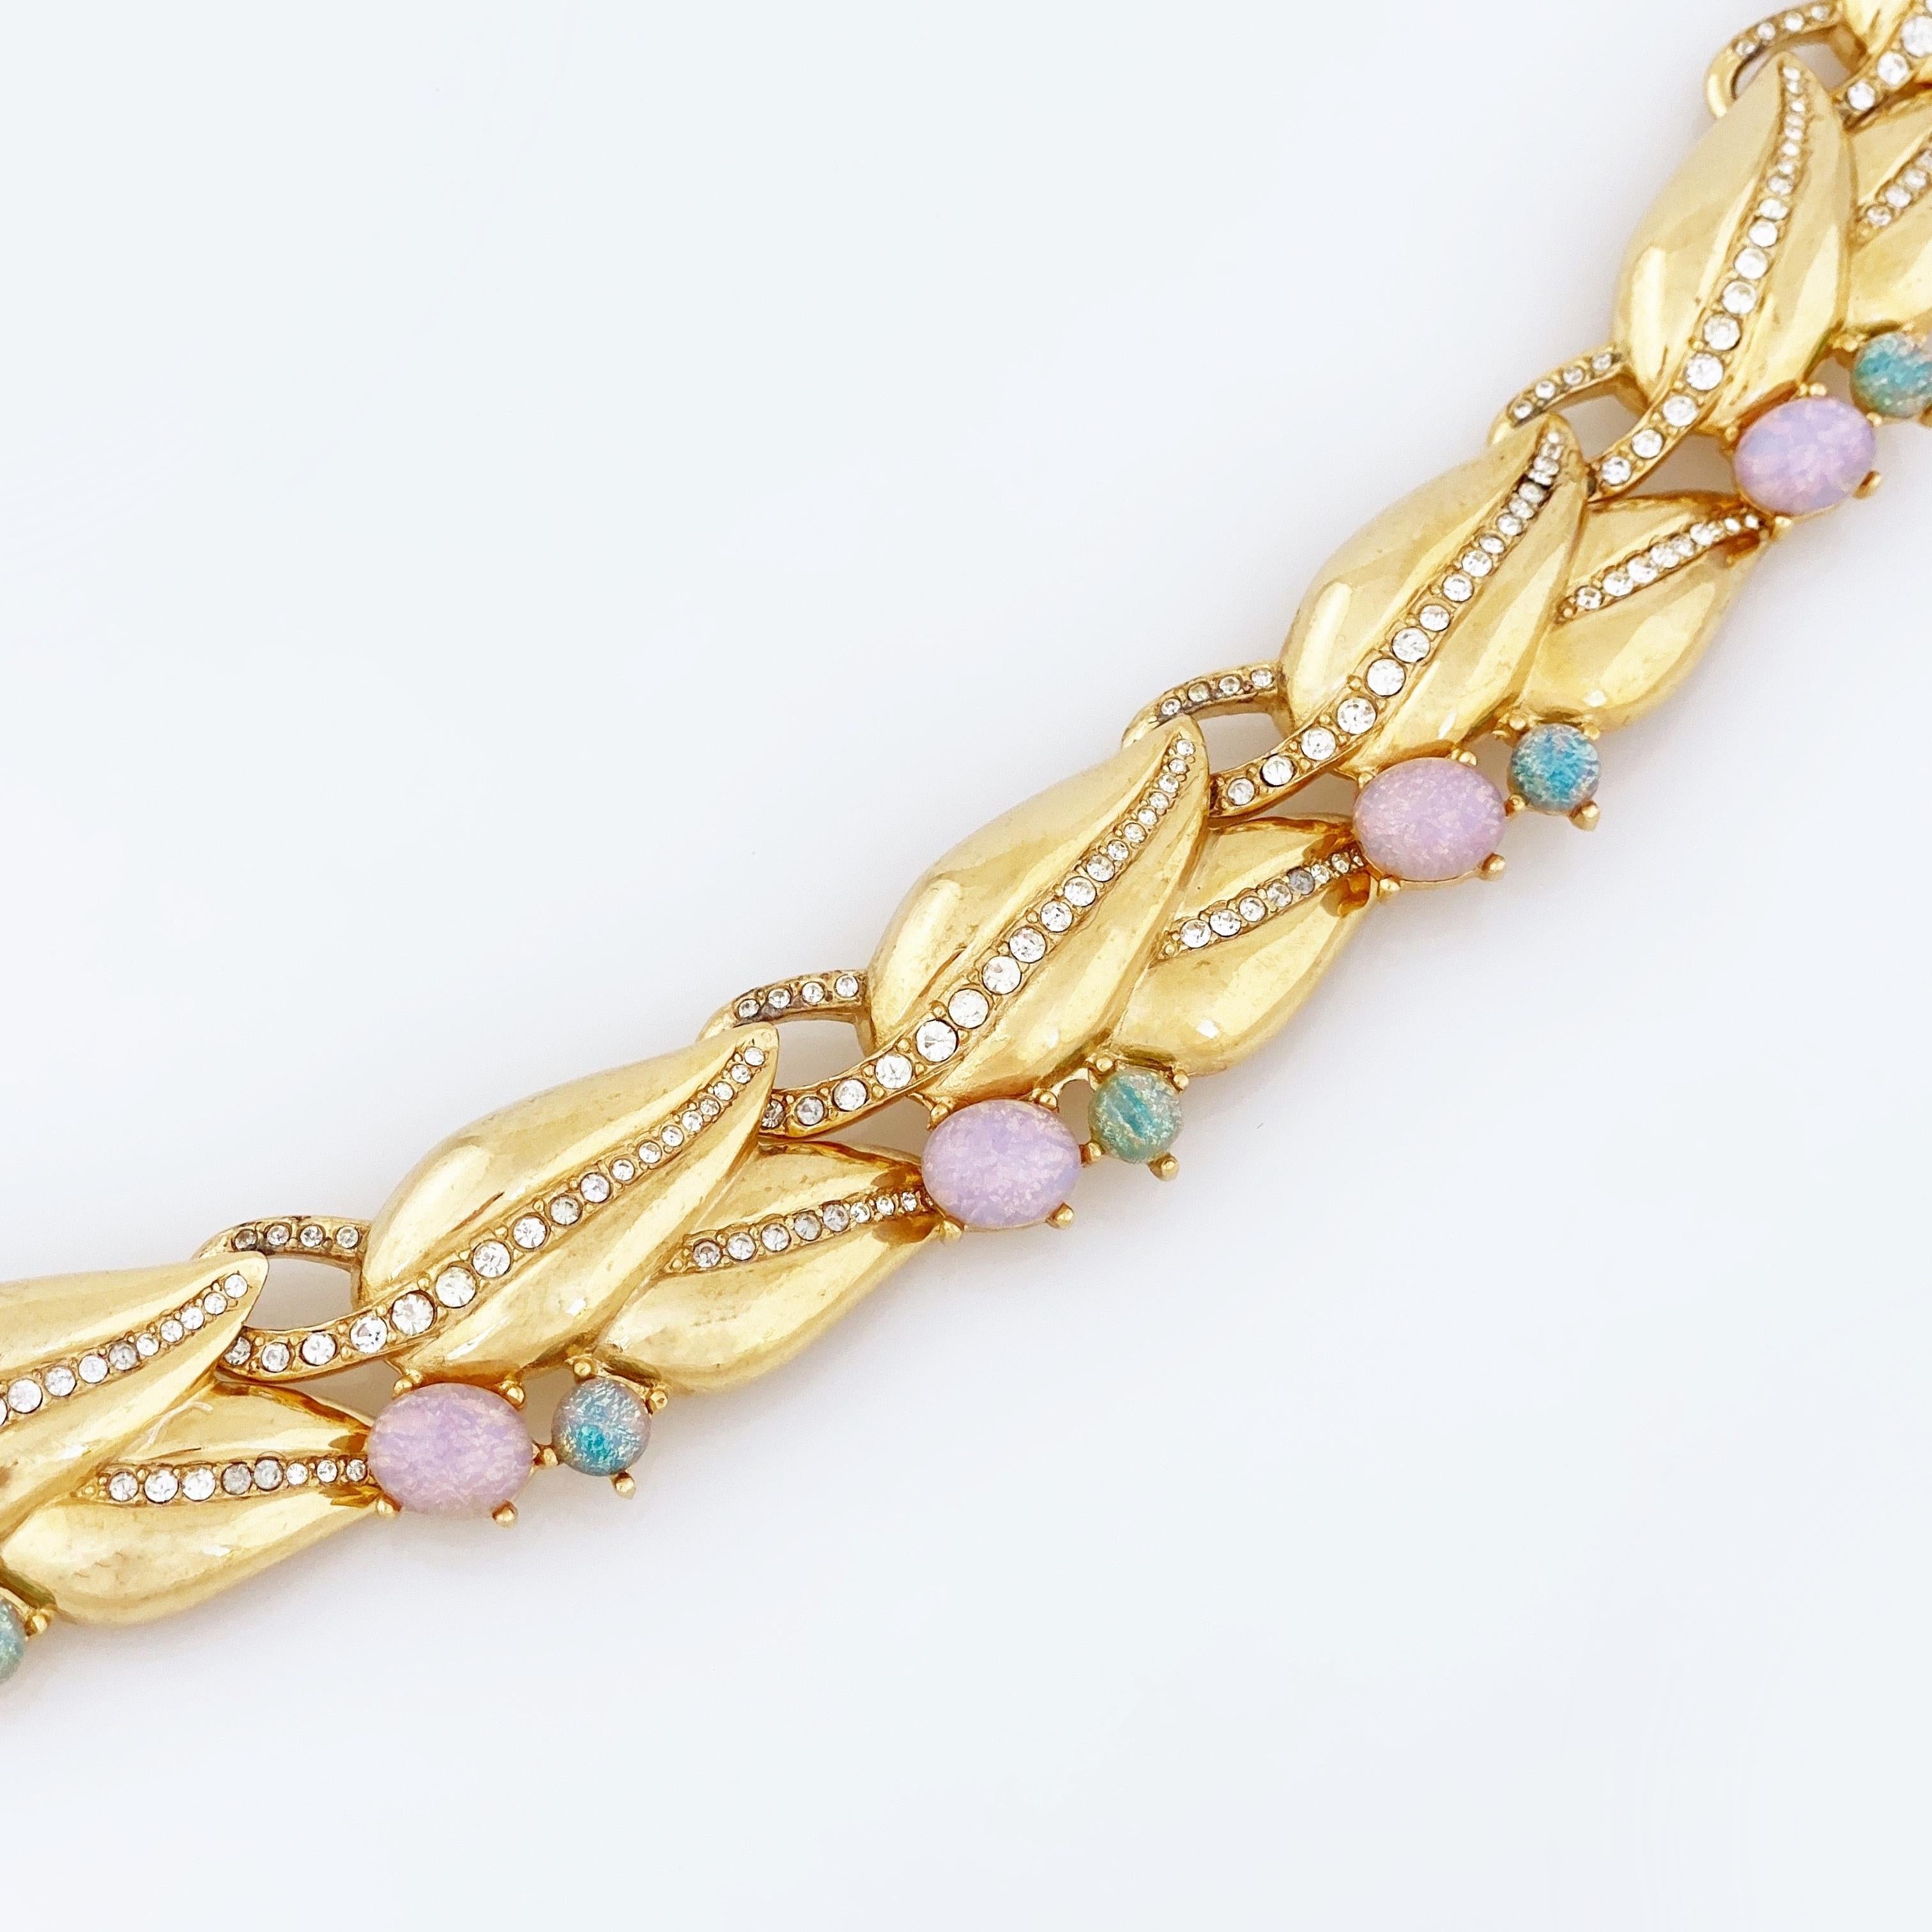 Modern Gold Leaf Link Choker Necklace With Faux Opals By Givenchy, 1980s For Sale